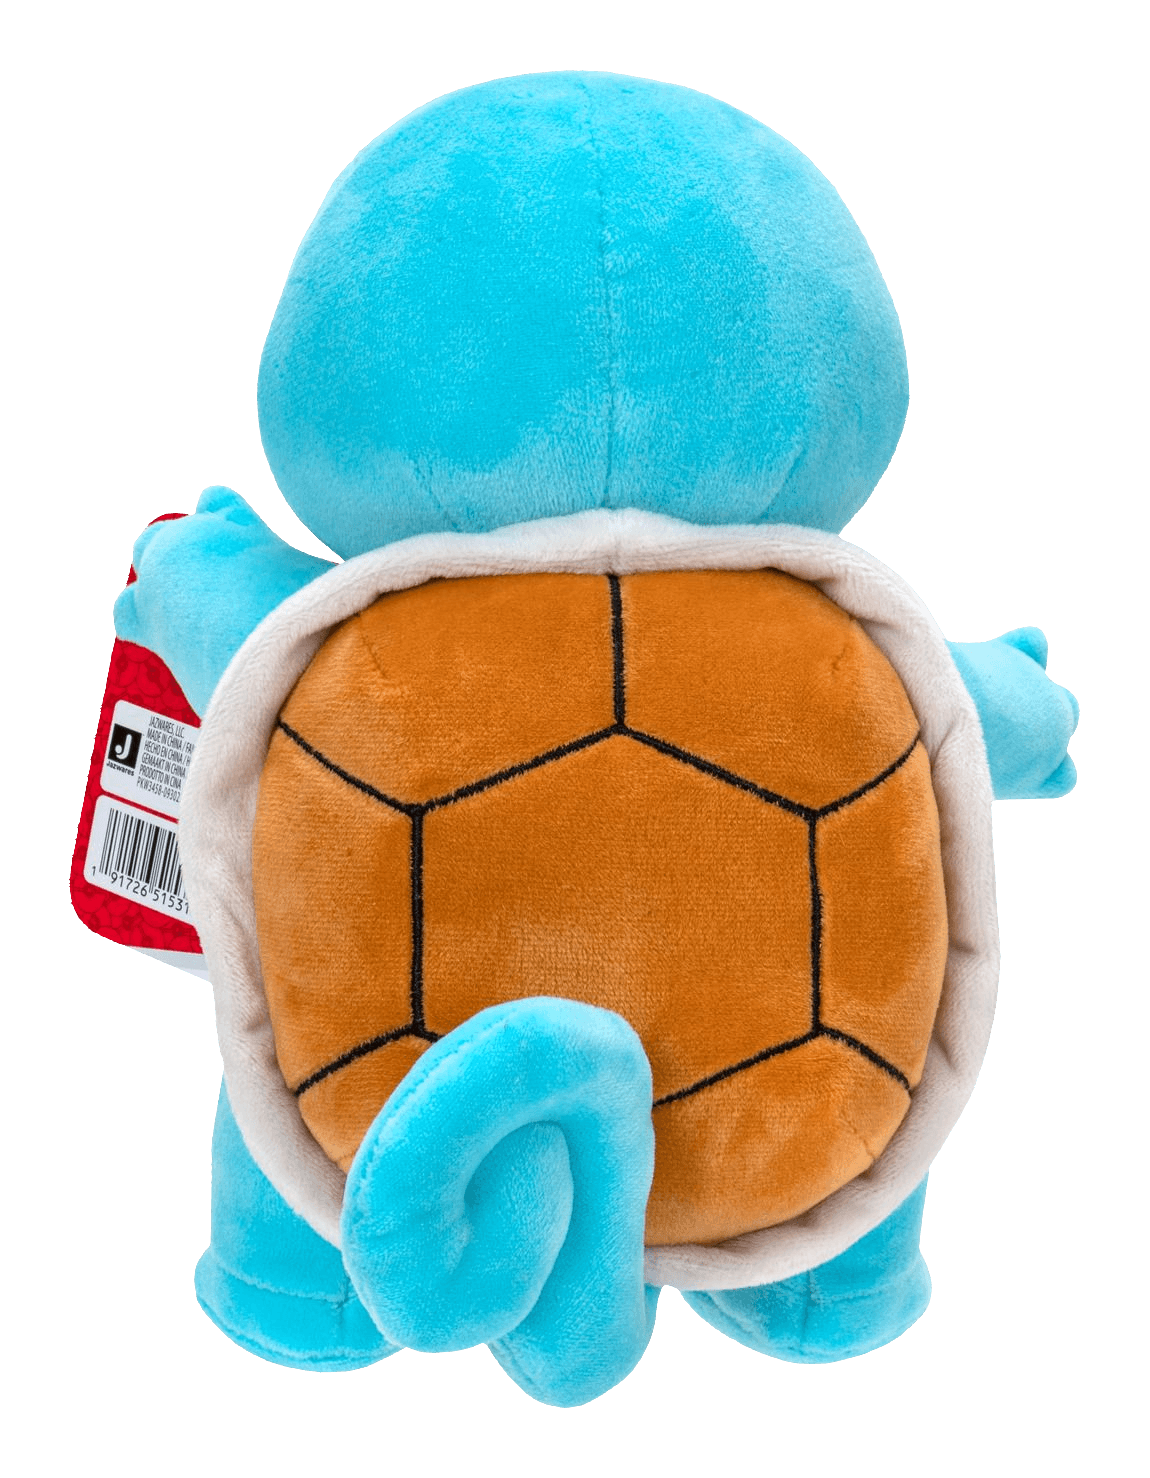 Jazwares - Pokemon Plush - Squirtle (8in) - The Card Vault